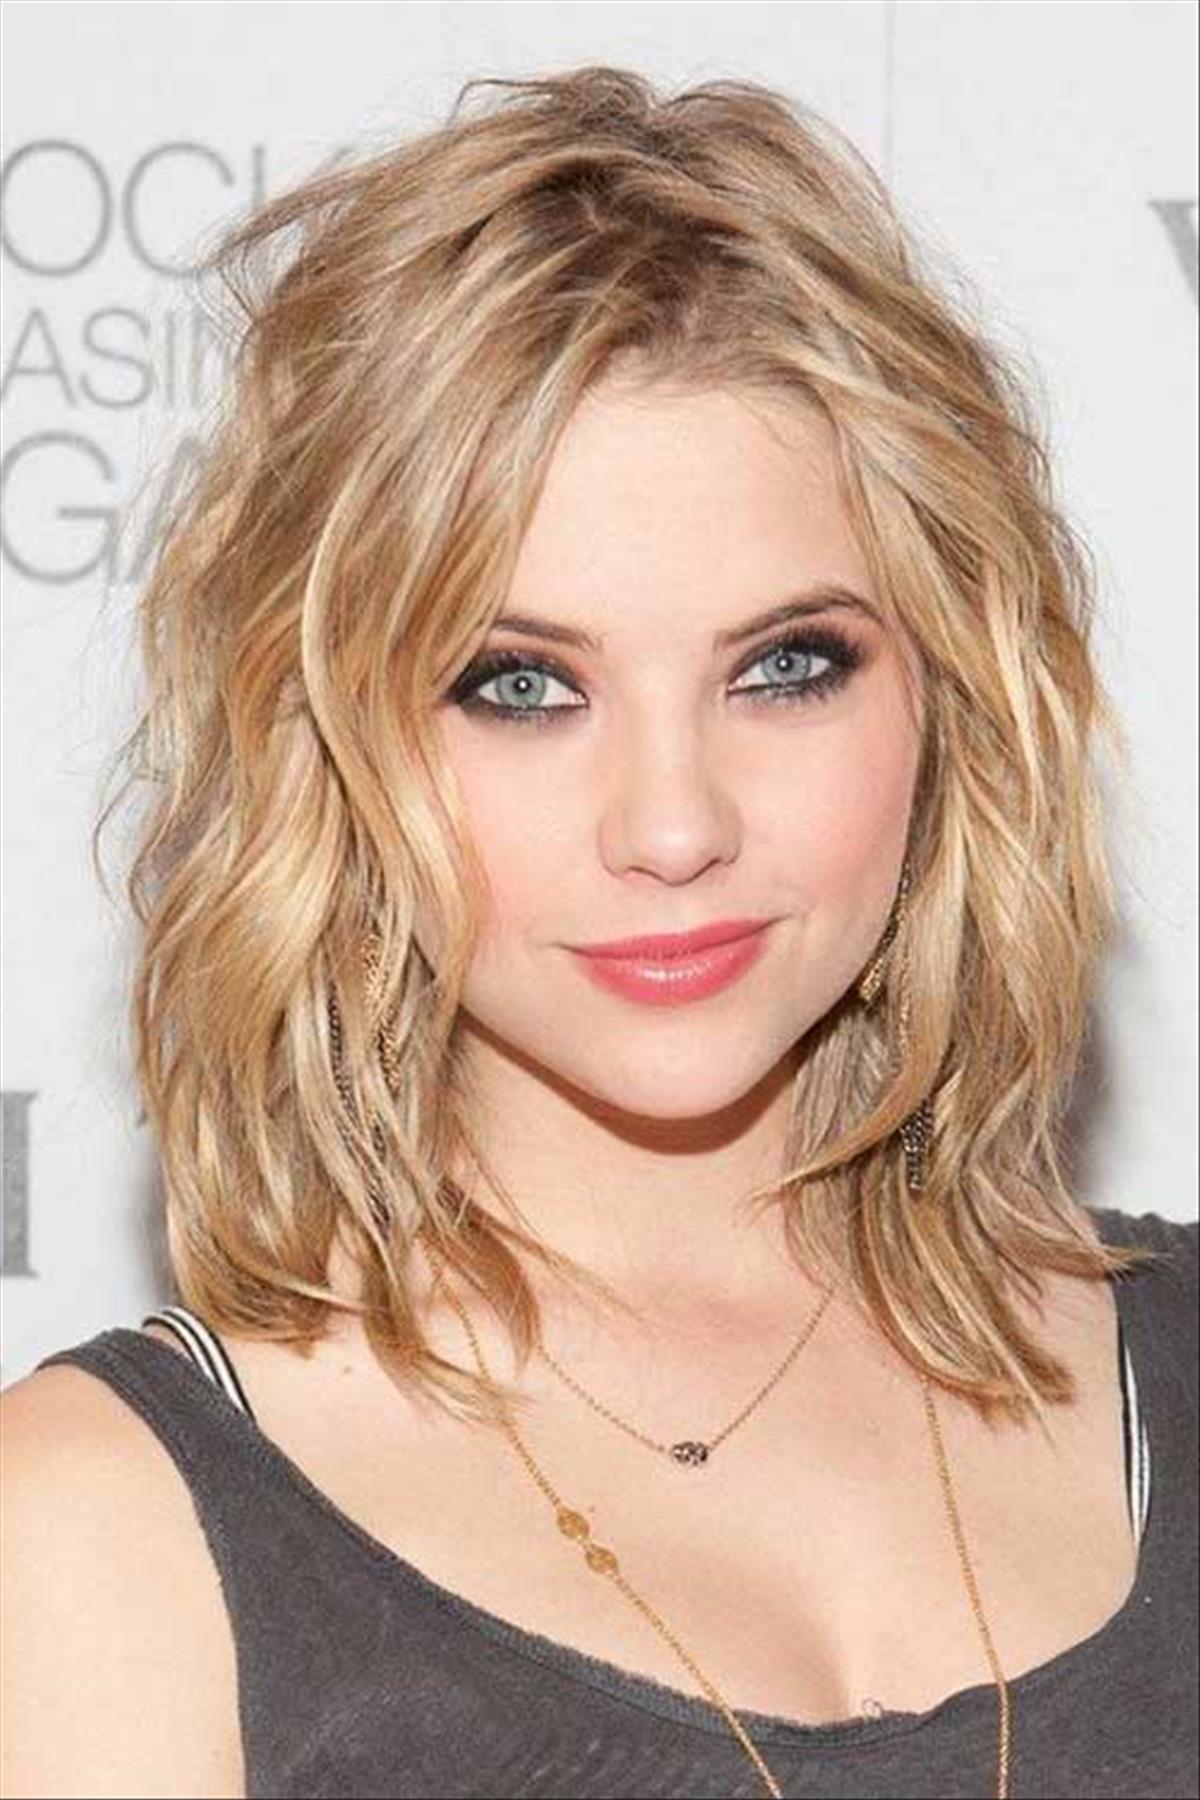 Best short hair with layers for any face shape